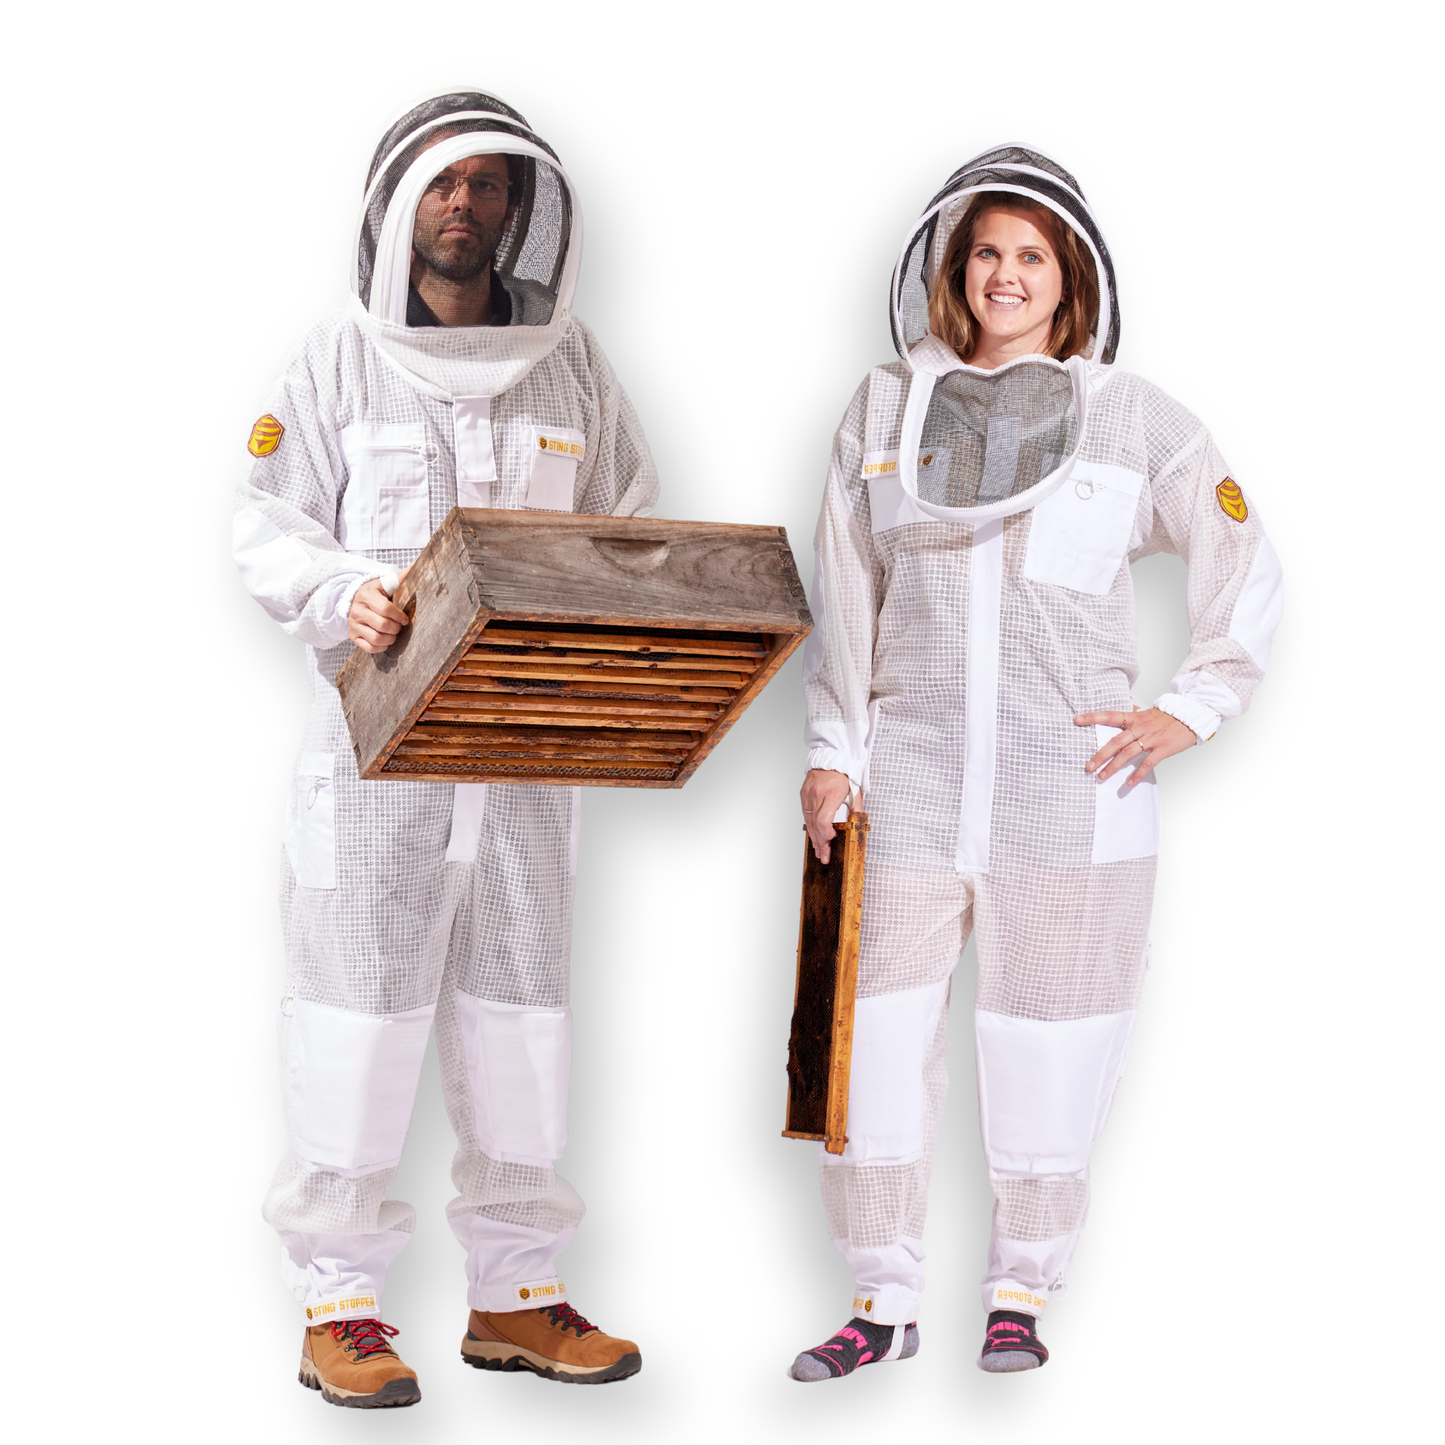 FREE - Sting Stopper Professional Ventilated Beekeeping Suit - Beekeeper White